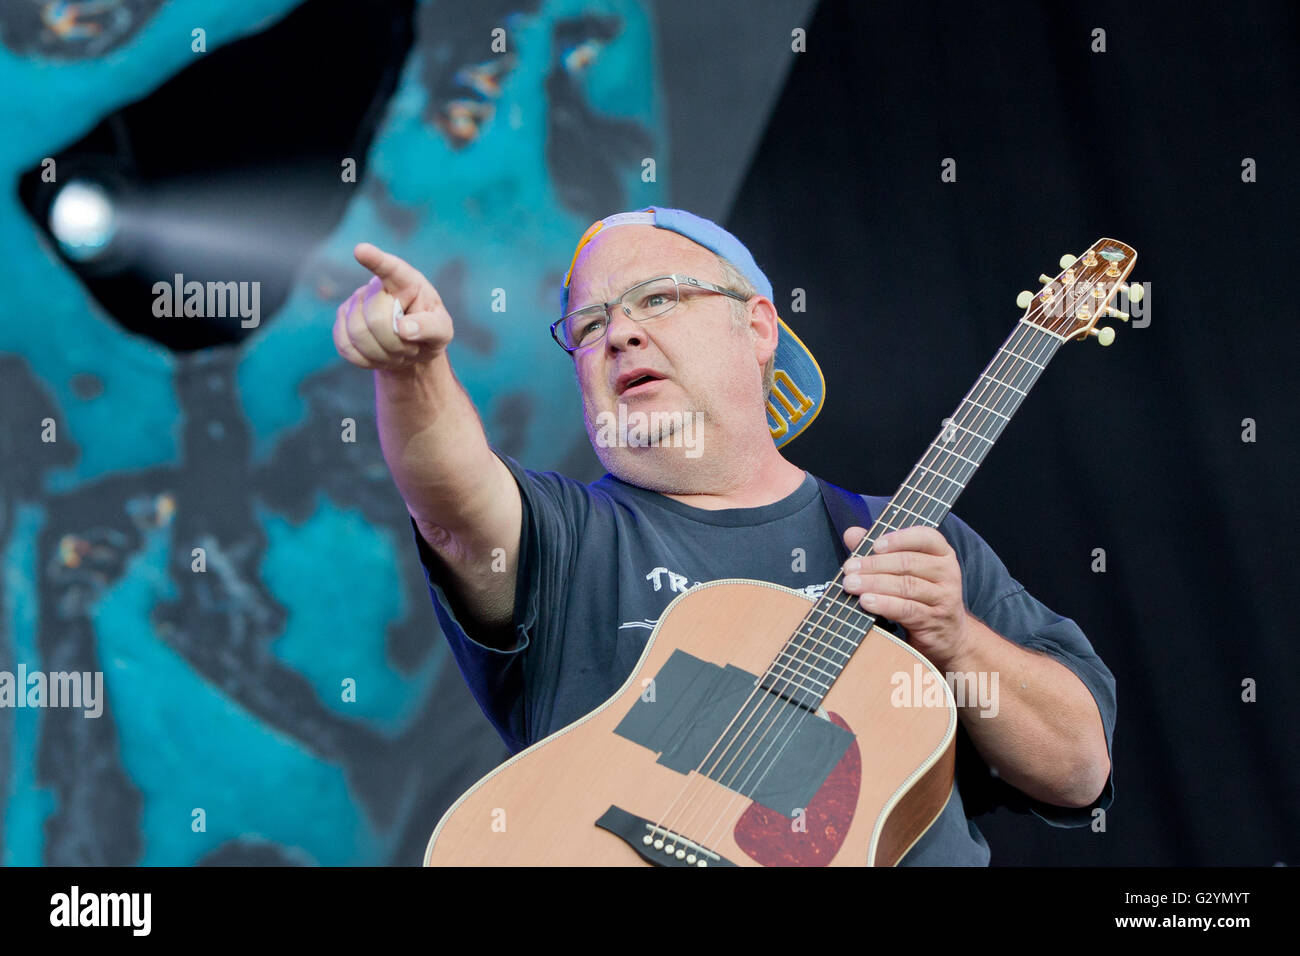 Nuremberg, Germany. 04th June, 2016. US singer and actor Kyle Gass of the band Tenacious D. performs on stage at the 'Rock im Park' (Rock in the Park) music festival in Nuremberg, Germany, 04 June 2016. More than 80 bands are set to perform at the festival until 05 June. Photo: DANIEL KARMANN/dpa/Alamy Live News Stock Photo